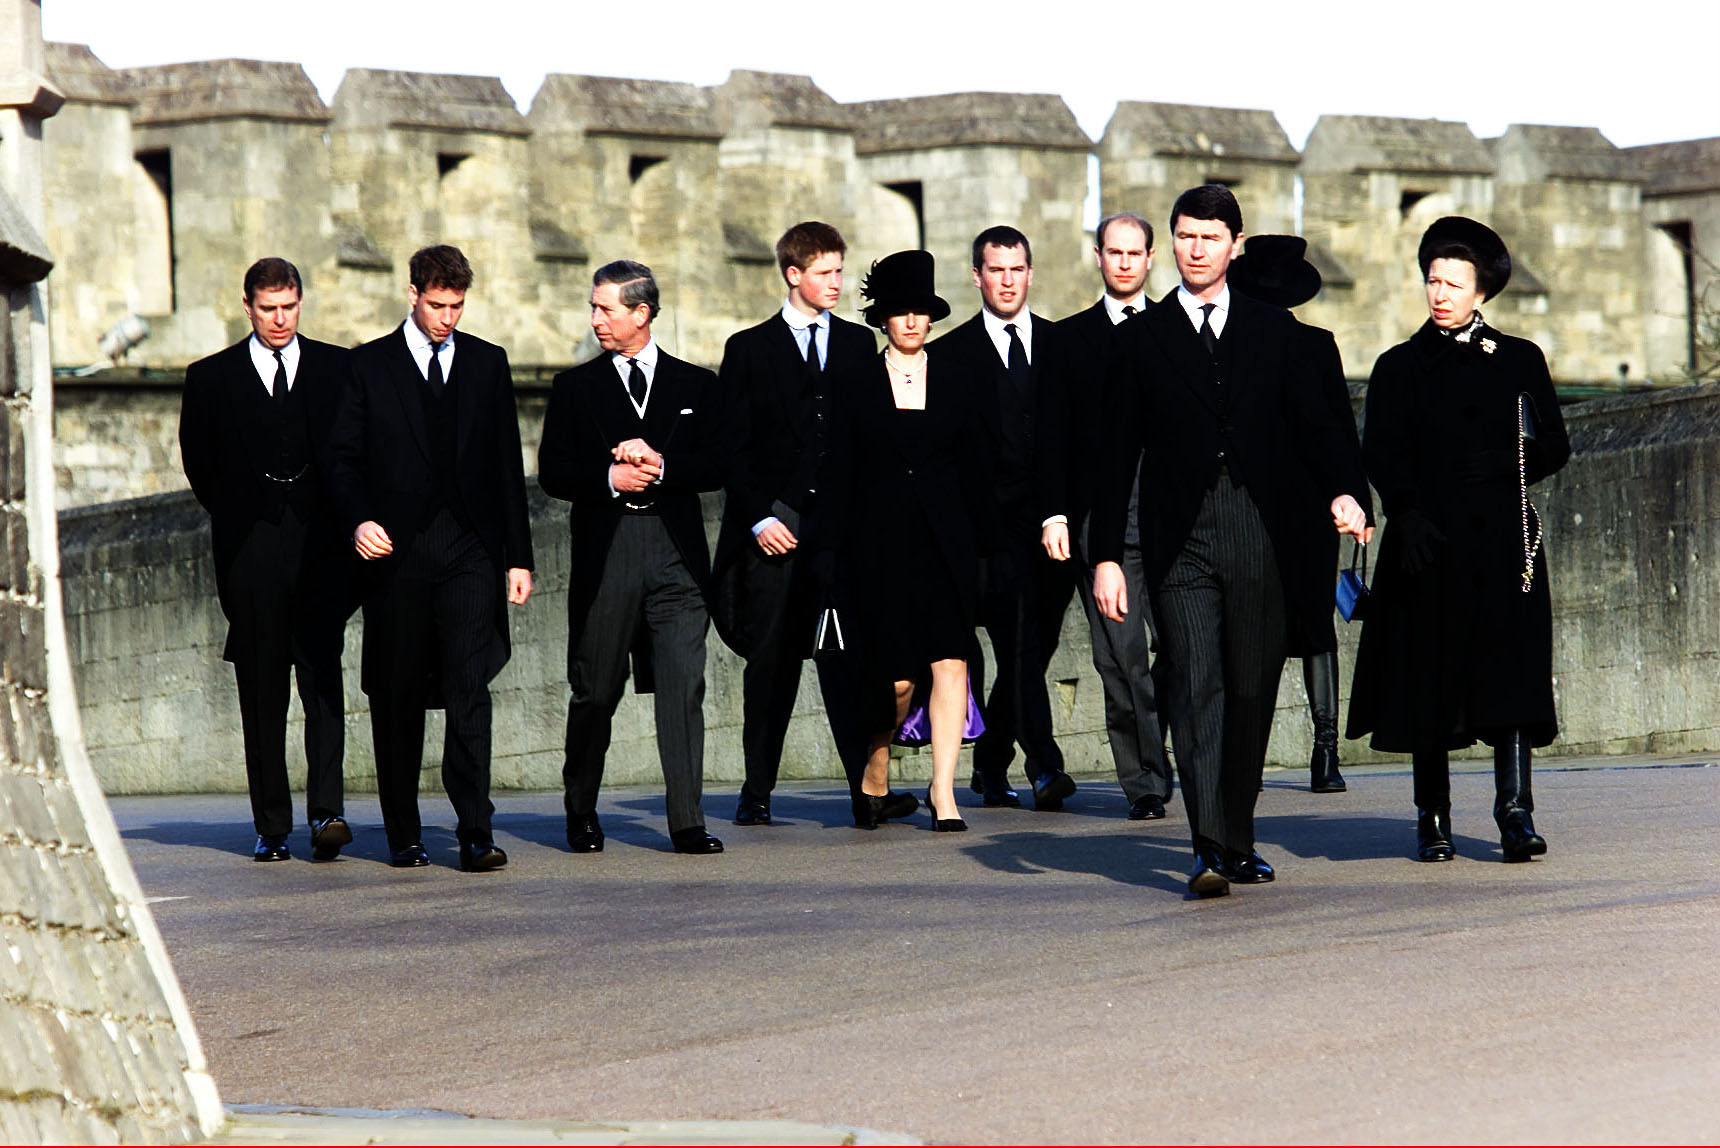 <p>Members of Britain's royal family -- Prince Andrew, Prince William, Prince Charles (now King Charles III), Prince Harry, Sophie, Countess of Wessex (now Duchess of Edinburgh), Peter Phillips, Prince Edward, Vice Admiral Sir Timothy Laurence and Princess Anne -- arrived for the funeral of Princess Margaret at St. George's Chapel at Windsor Castle in Windsor, England, on Feb. 15, 2002.</p>